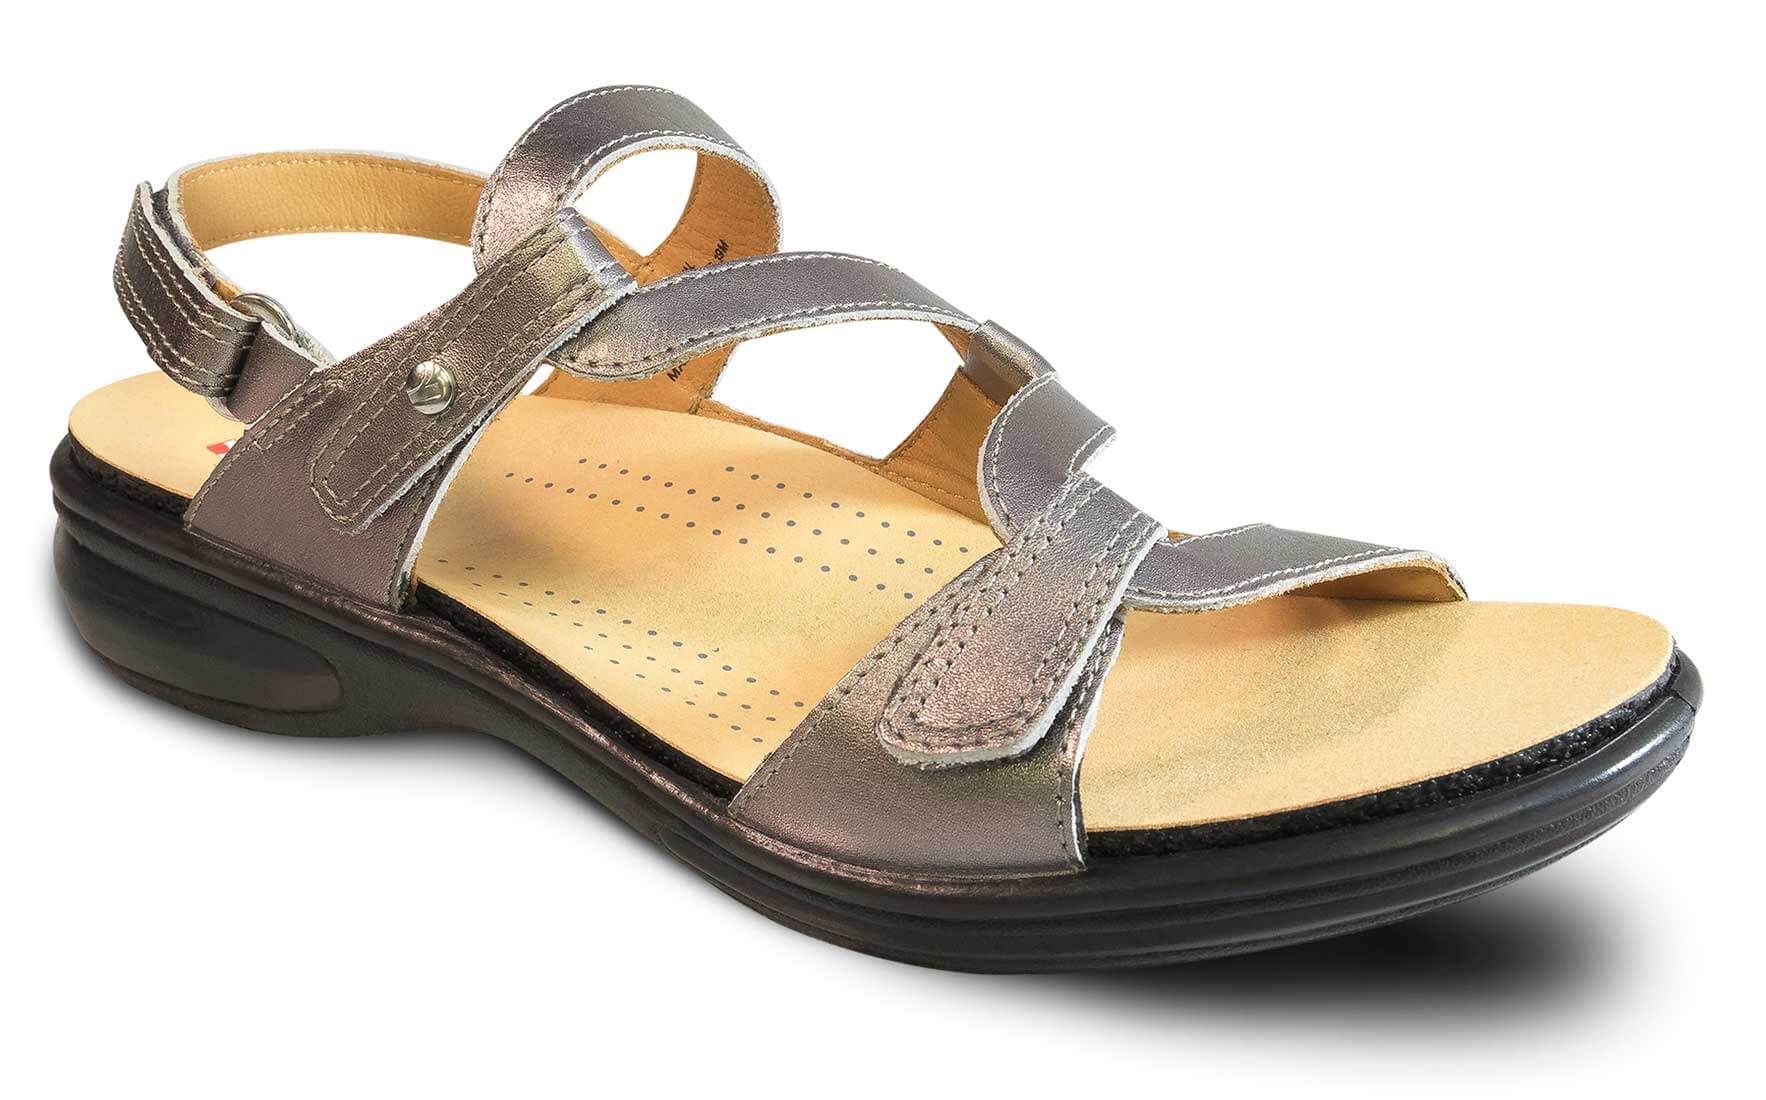 Revere Emerald - Women's Sandal - Extra Depth With Removable Foot Beds